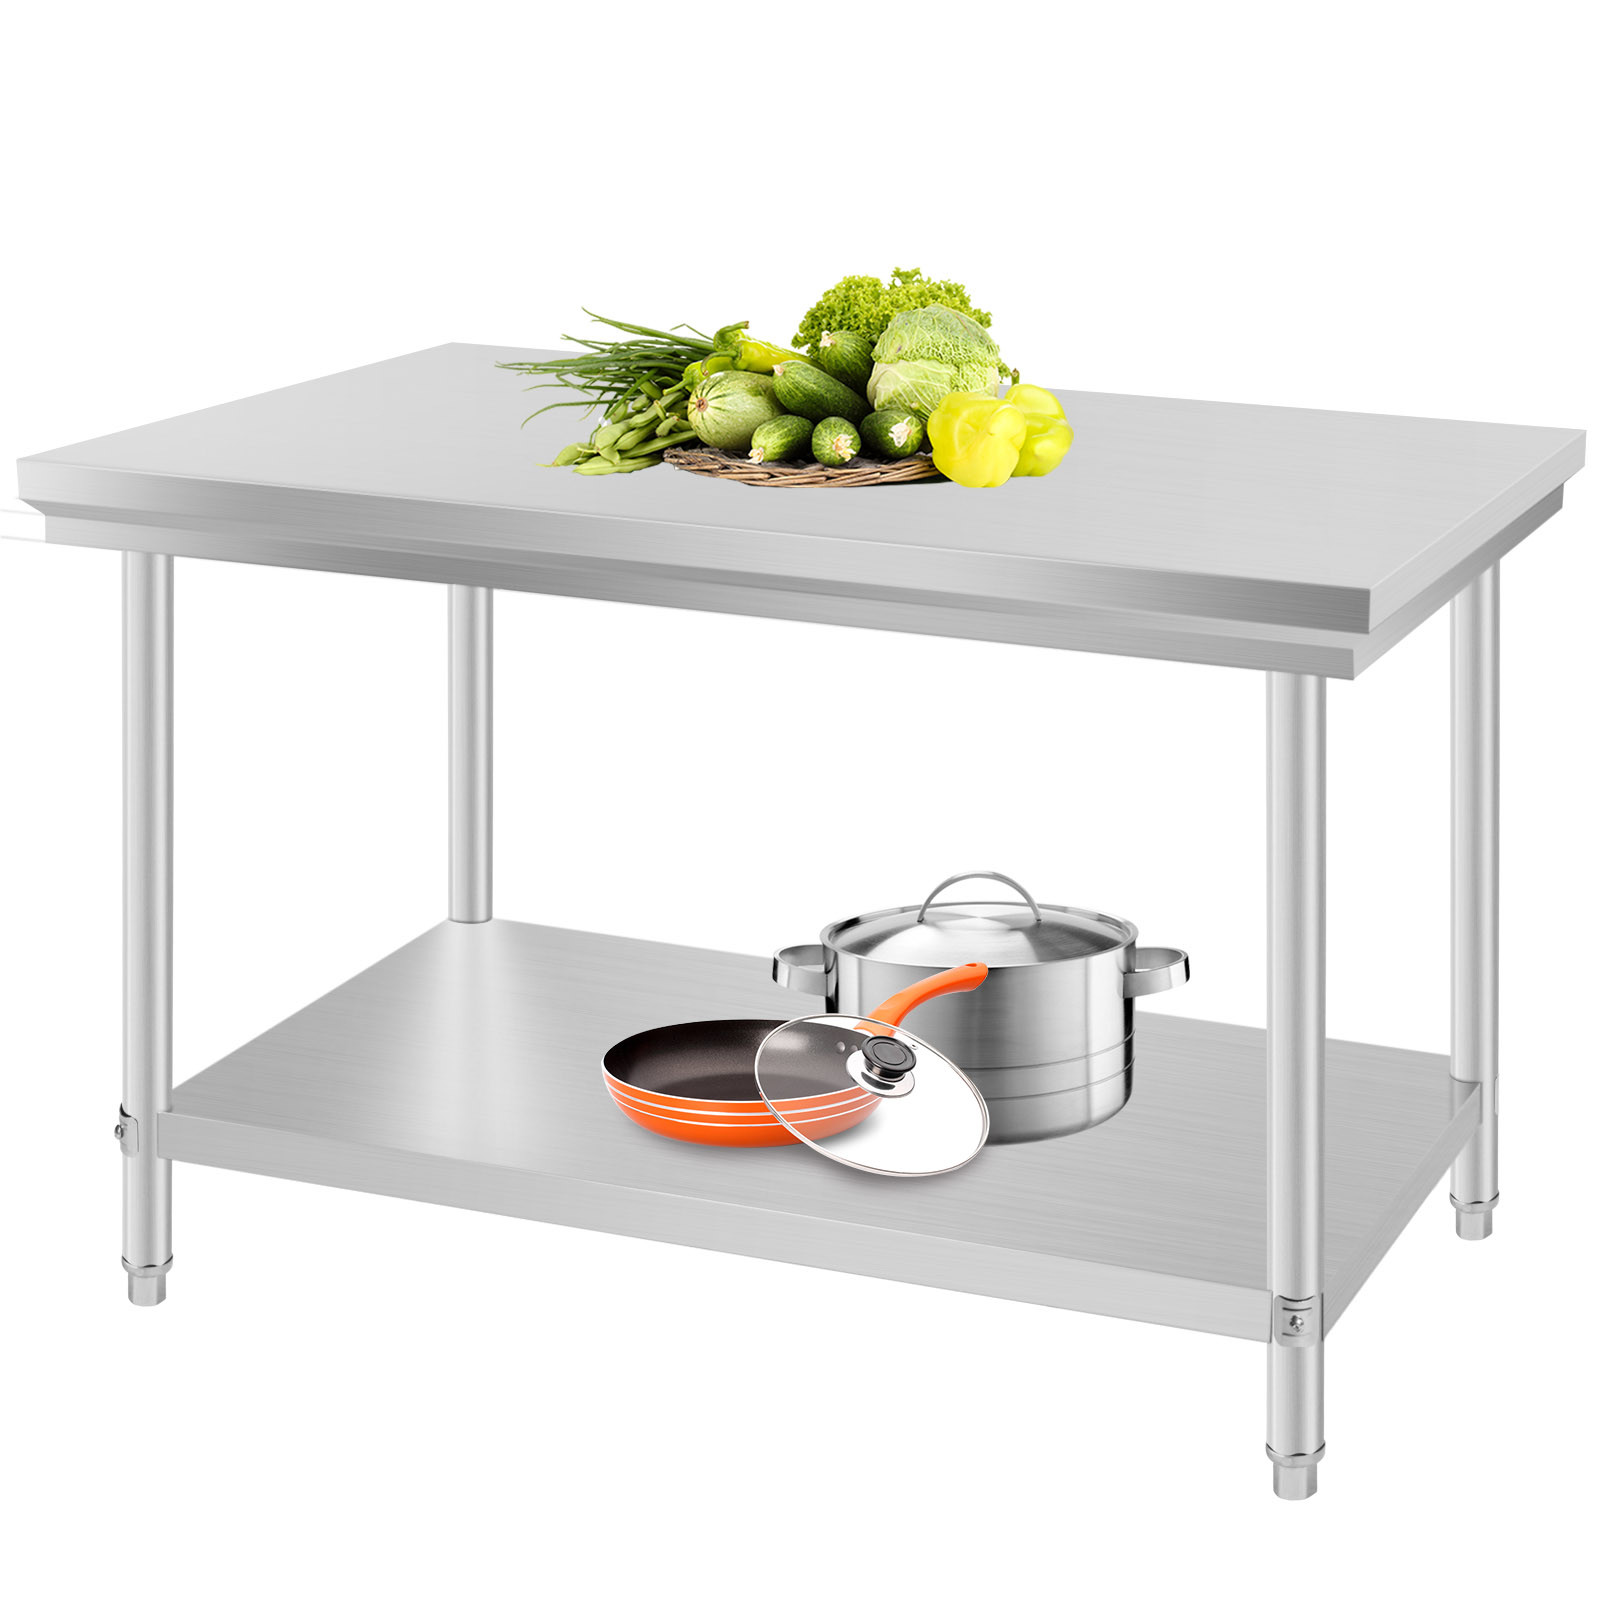 Kitchen Work Tables With Storage
 24" x 48" Stainless Steel Kitchen Work Prep Table Storage